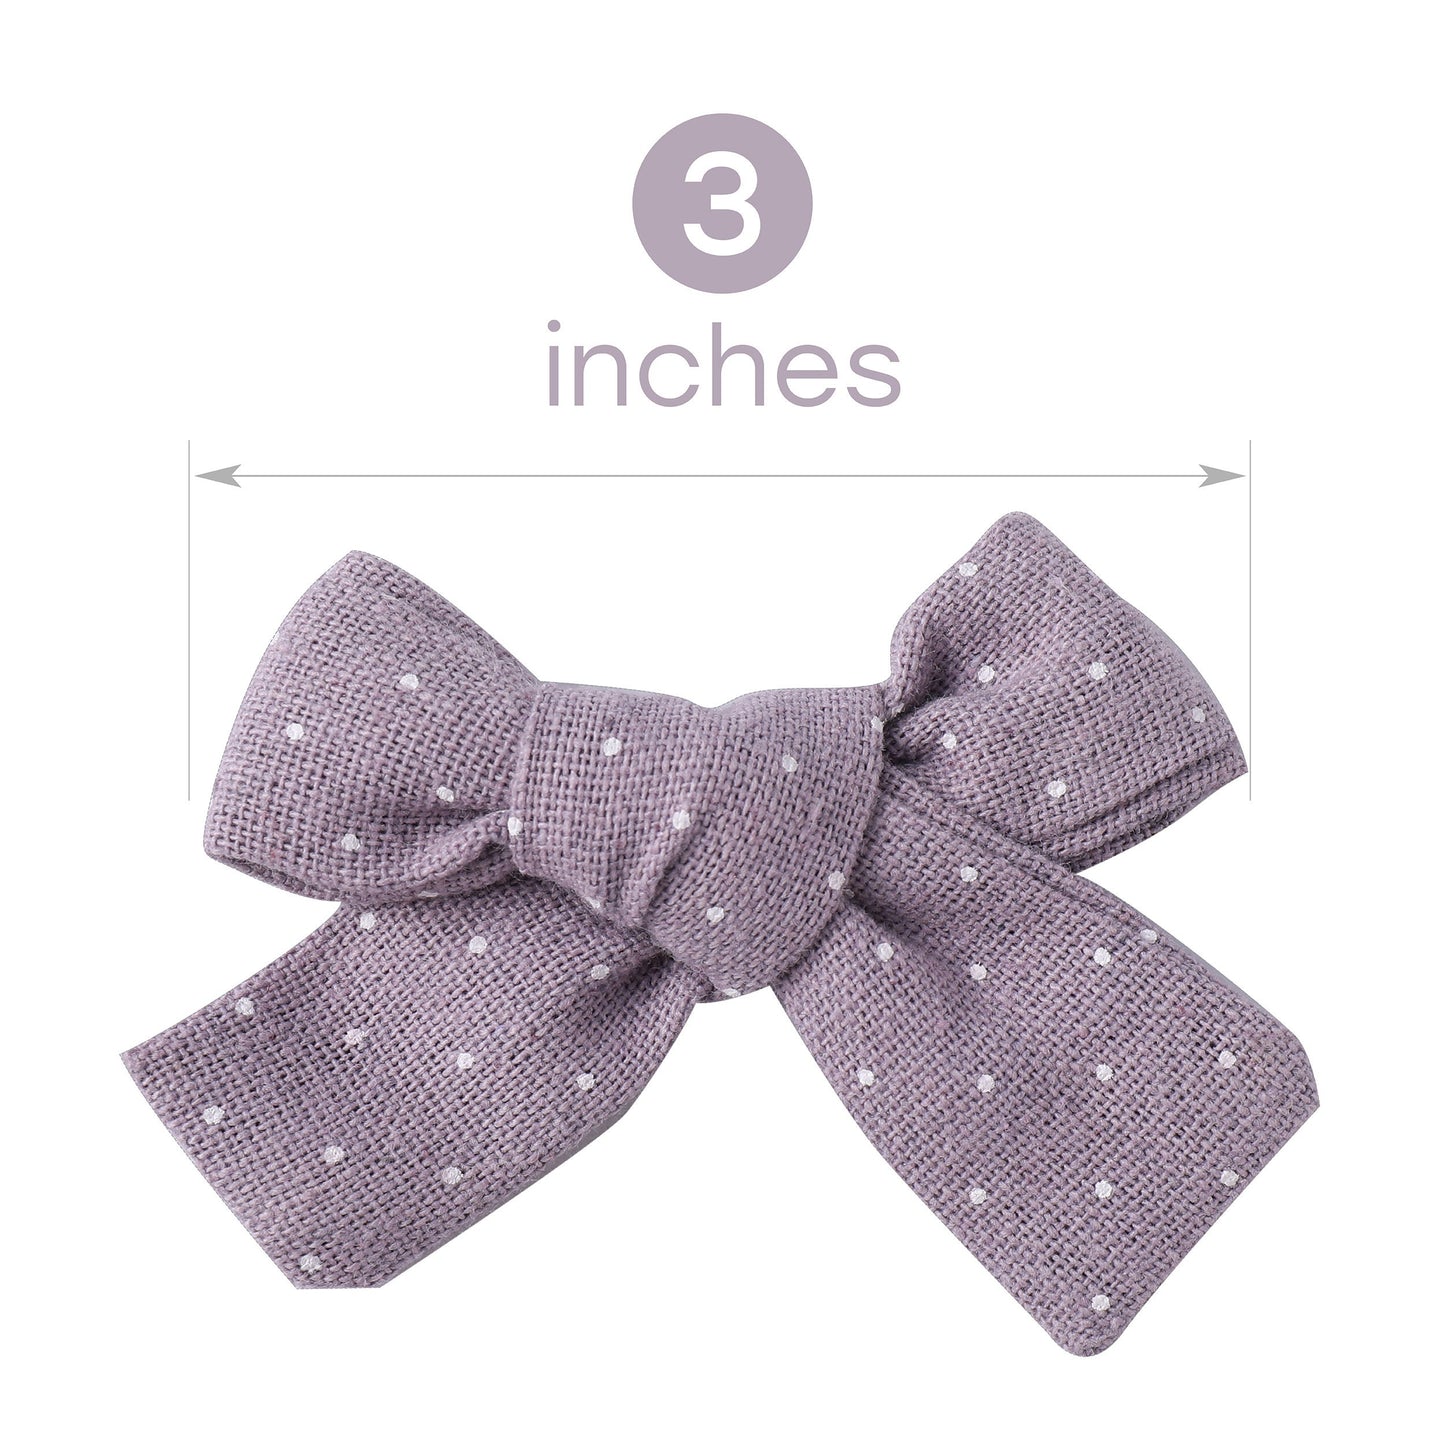 Polka Dot Linen hair bow clips bows for toddlers girls, school bow bows hair clips for girls barrettes alligator clip